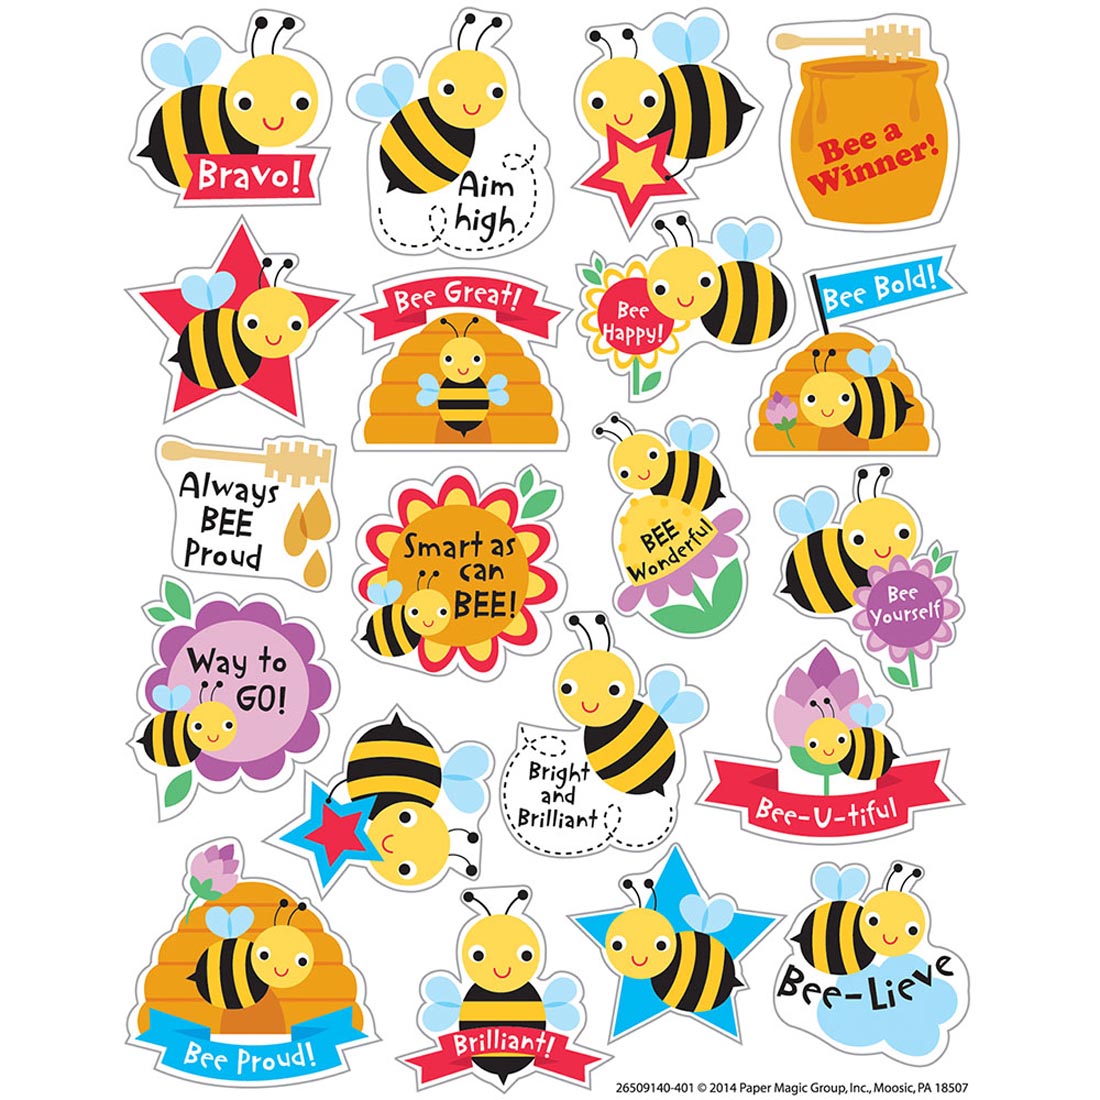 Honey Scented Stickers by Eureka are Bees with Sayings Like Bravo, Bee a Winner and Bee Bold